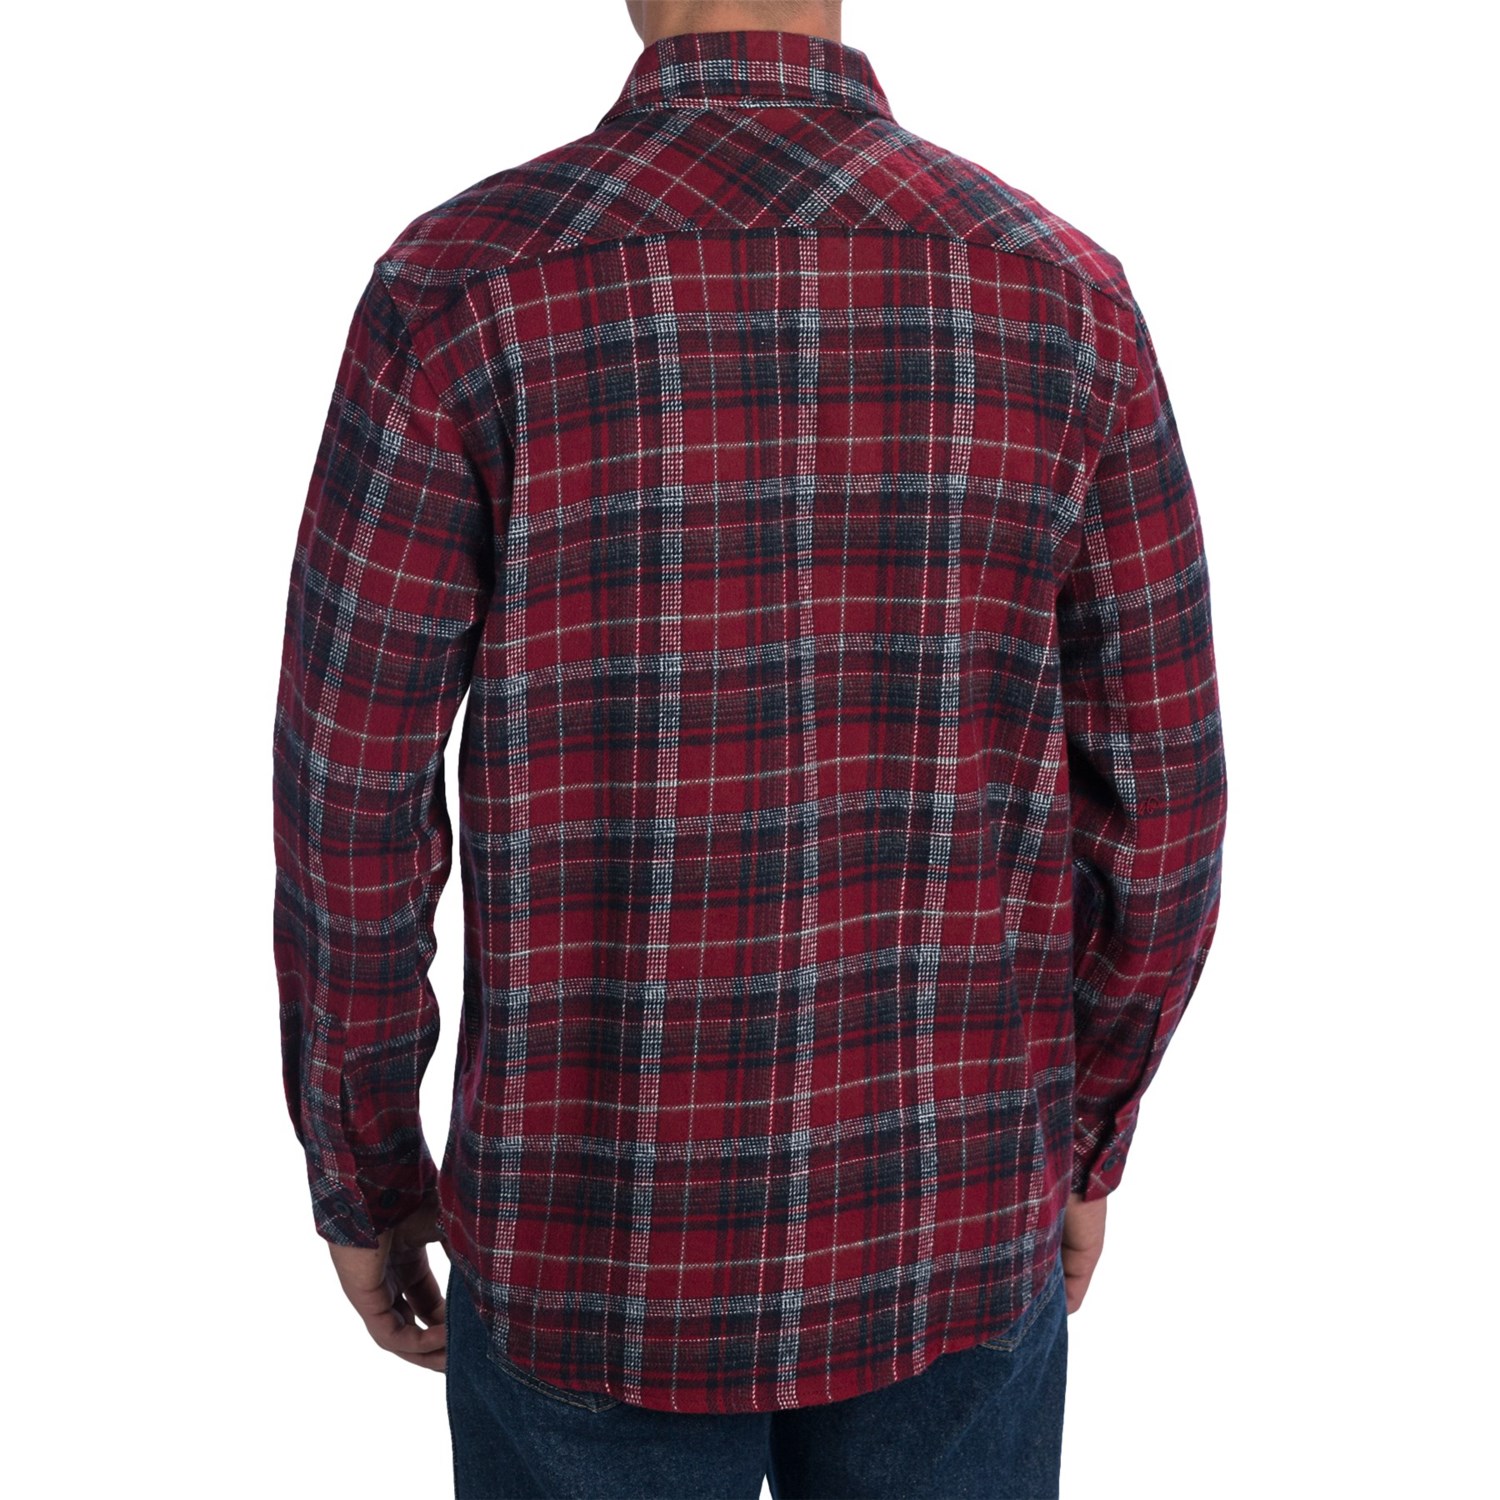 Dickies Brawny Flannel Shirt (For Men) 7594H - Save 37%